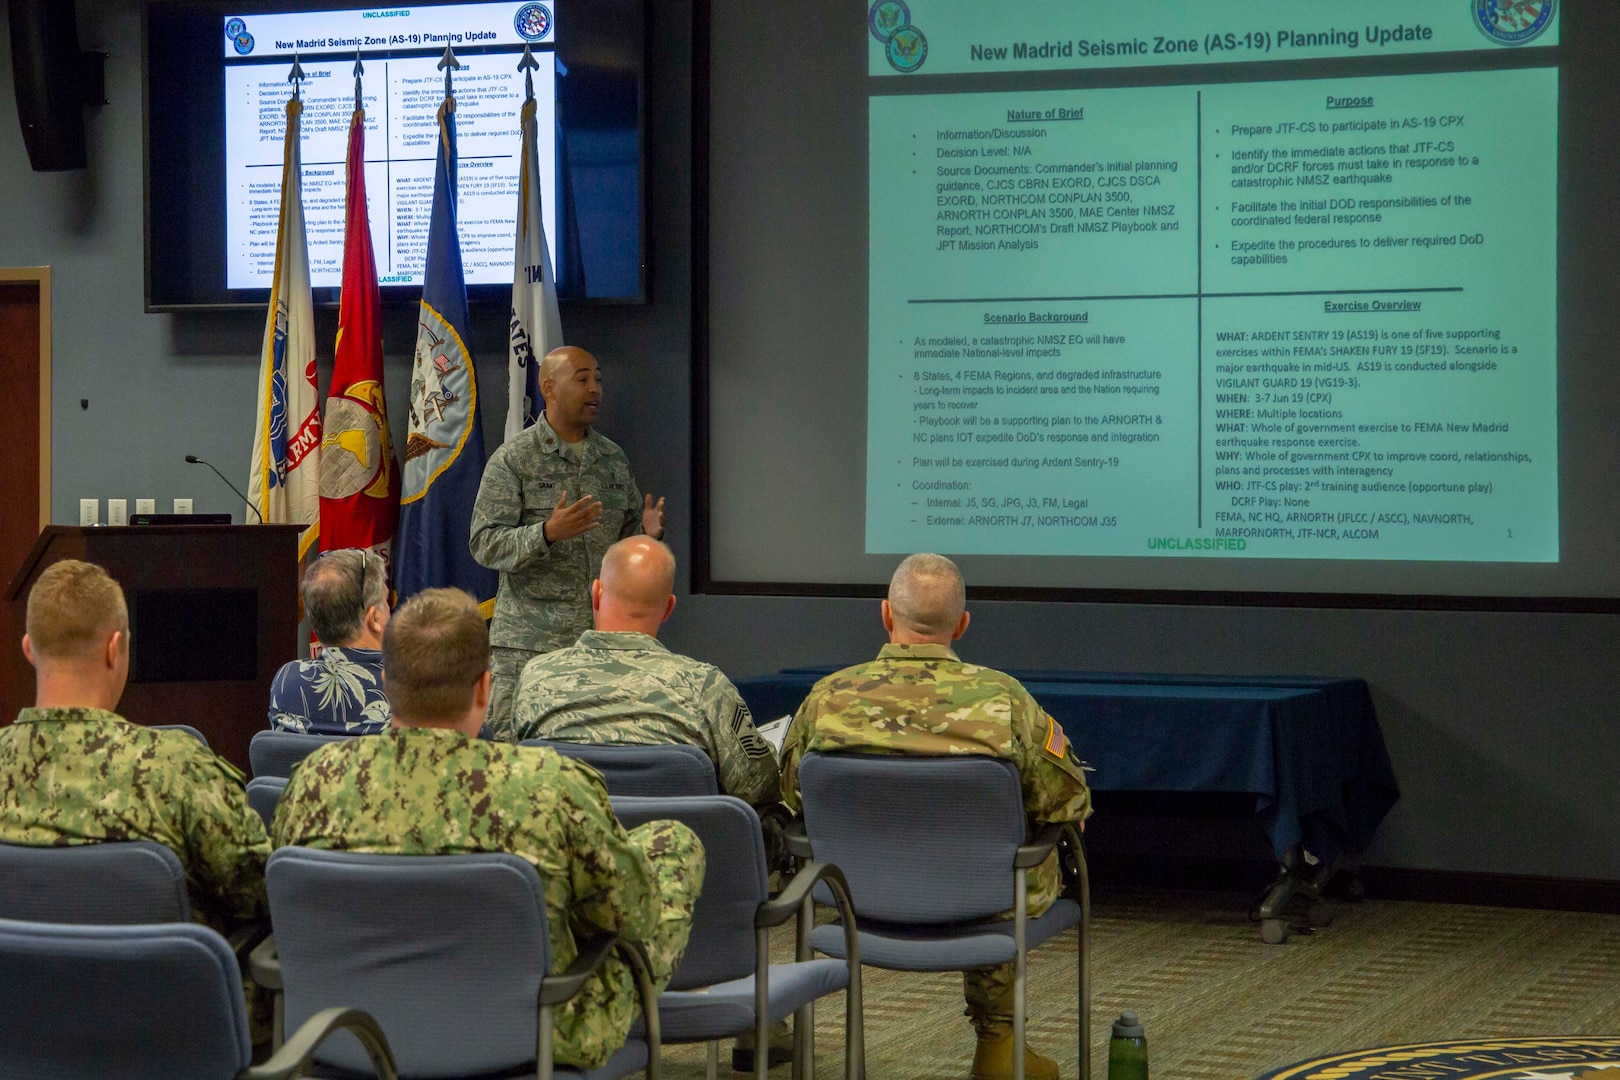 Air Force Maj. Marcus Grant briefs members of Joint Task Force Civil Support (JTF-CS) on exercise Ardent Sentry, which will take place June 3-7, 2019. The exercise will focus on a complex catastrophic earthquake along the New Madrid Seismic Zone (NMSZ) as part of Defense Support of Civil Authorities. When directed, JTF-CS is ready to respond in 24 hours to provide command and control of 5,200 federal military forces located at more than 36 locations throughout the nation acting in support of civil authority response operations to save lives, prevent further injury, and provide critical support to enable community recover. (Official DoD photo by Mass Communication Specialist 3rd Class Michael Redd/released)